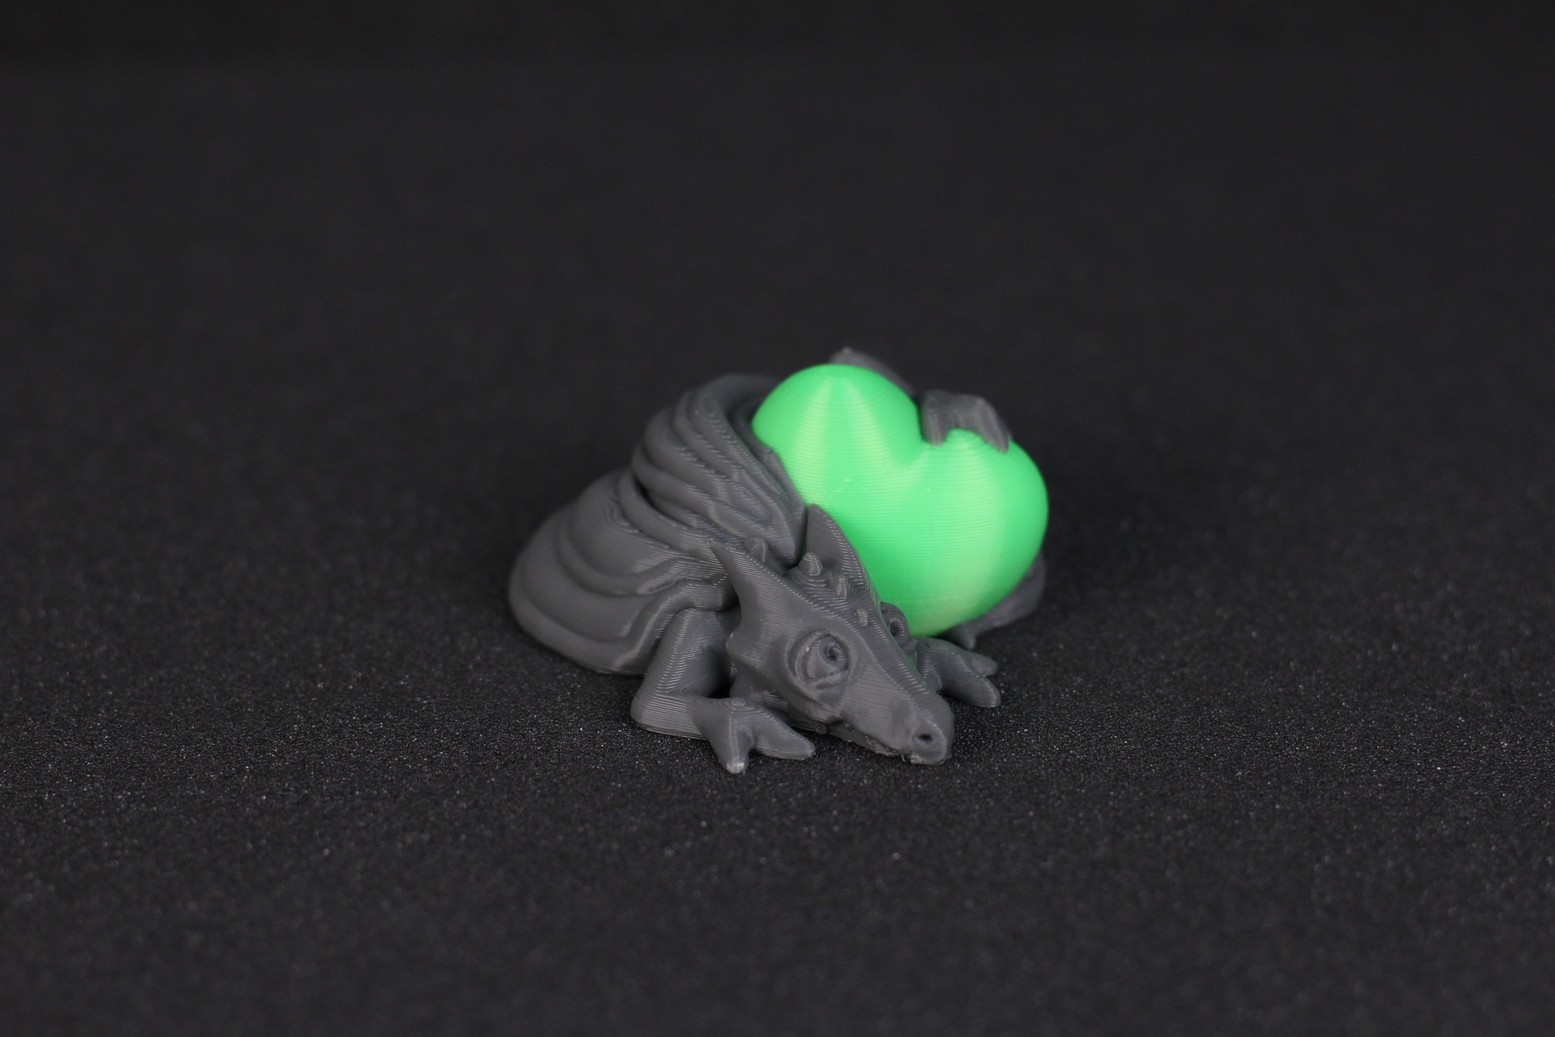 Dragon and Heart sample print for SC 10 Shark 2 | LOTMAXX SC-10 Shark V2 Review: Dual Color Printing and Laser Engraving